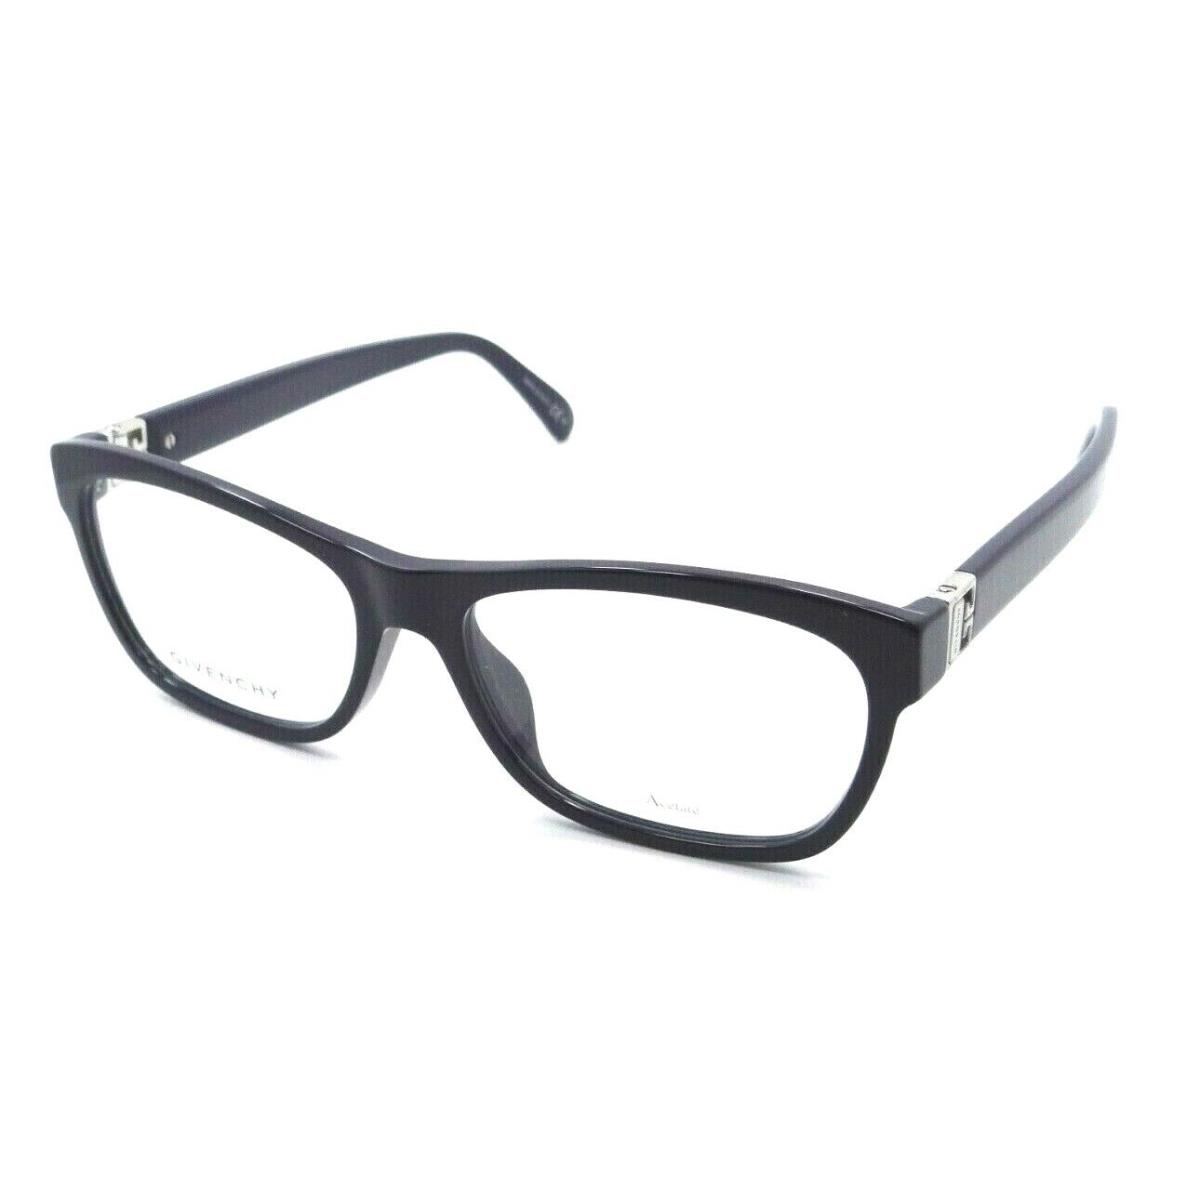 Givenchy Eyeglasses Frames GV 0111/G Pjp 54-16-145 Blue Made in Italy